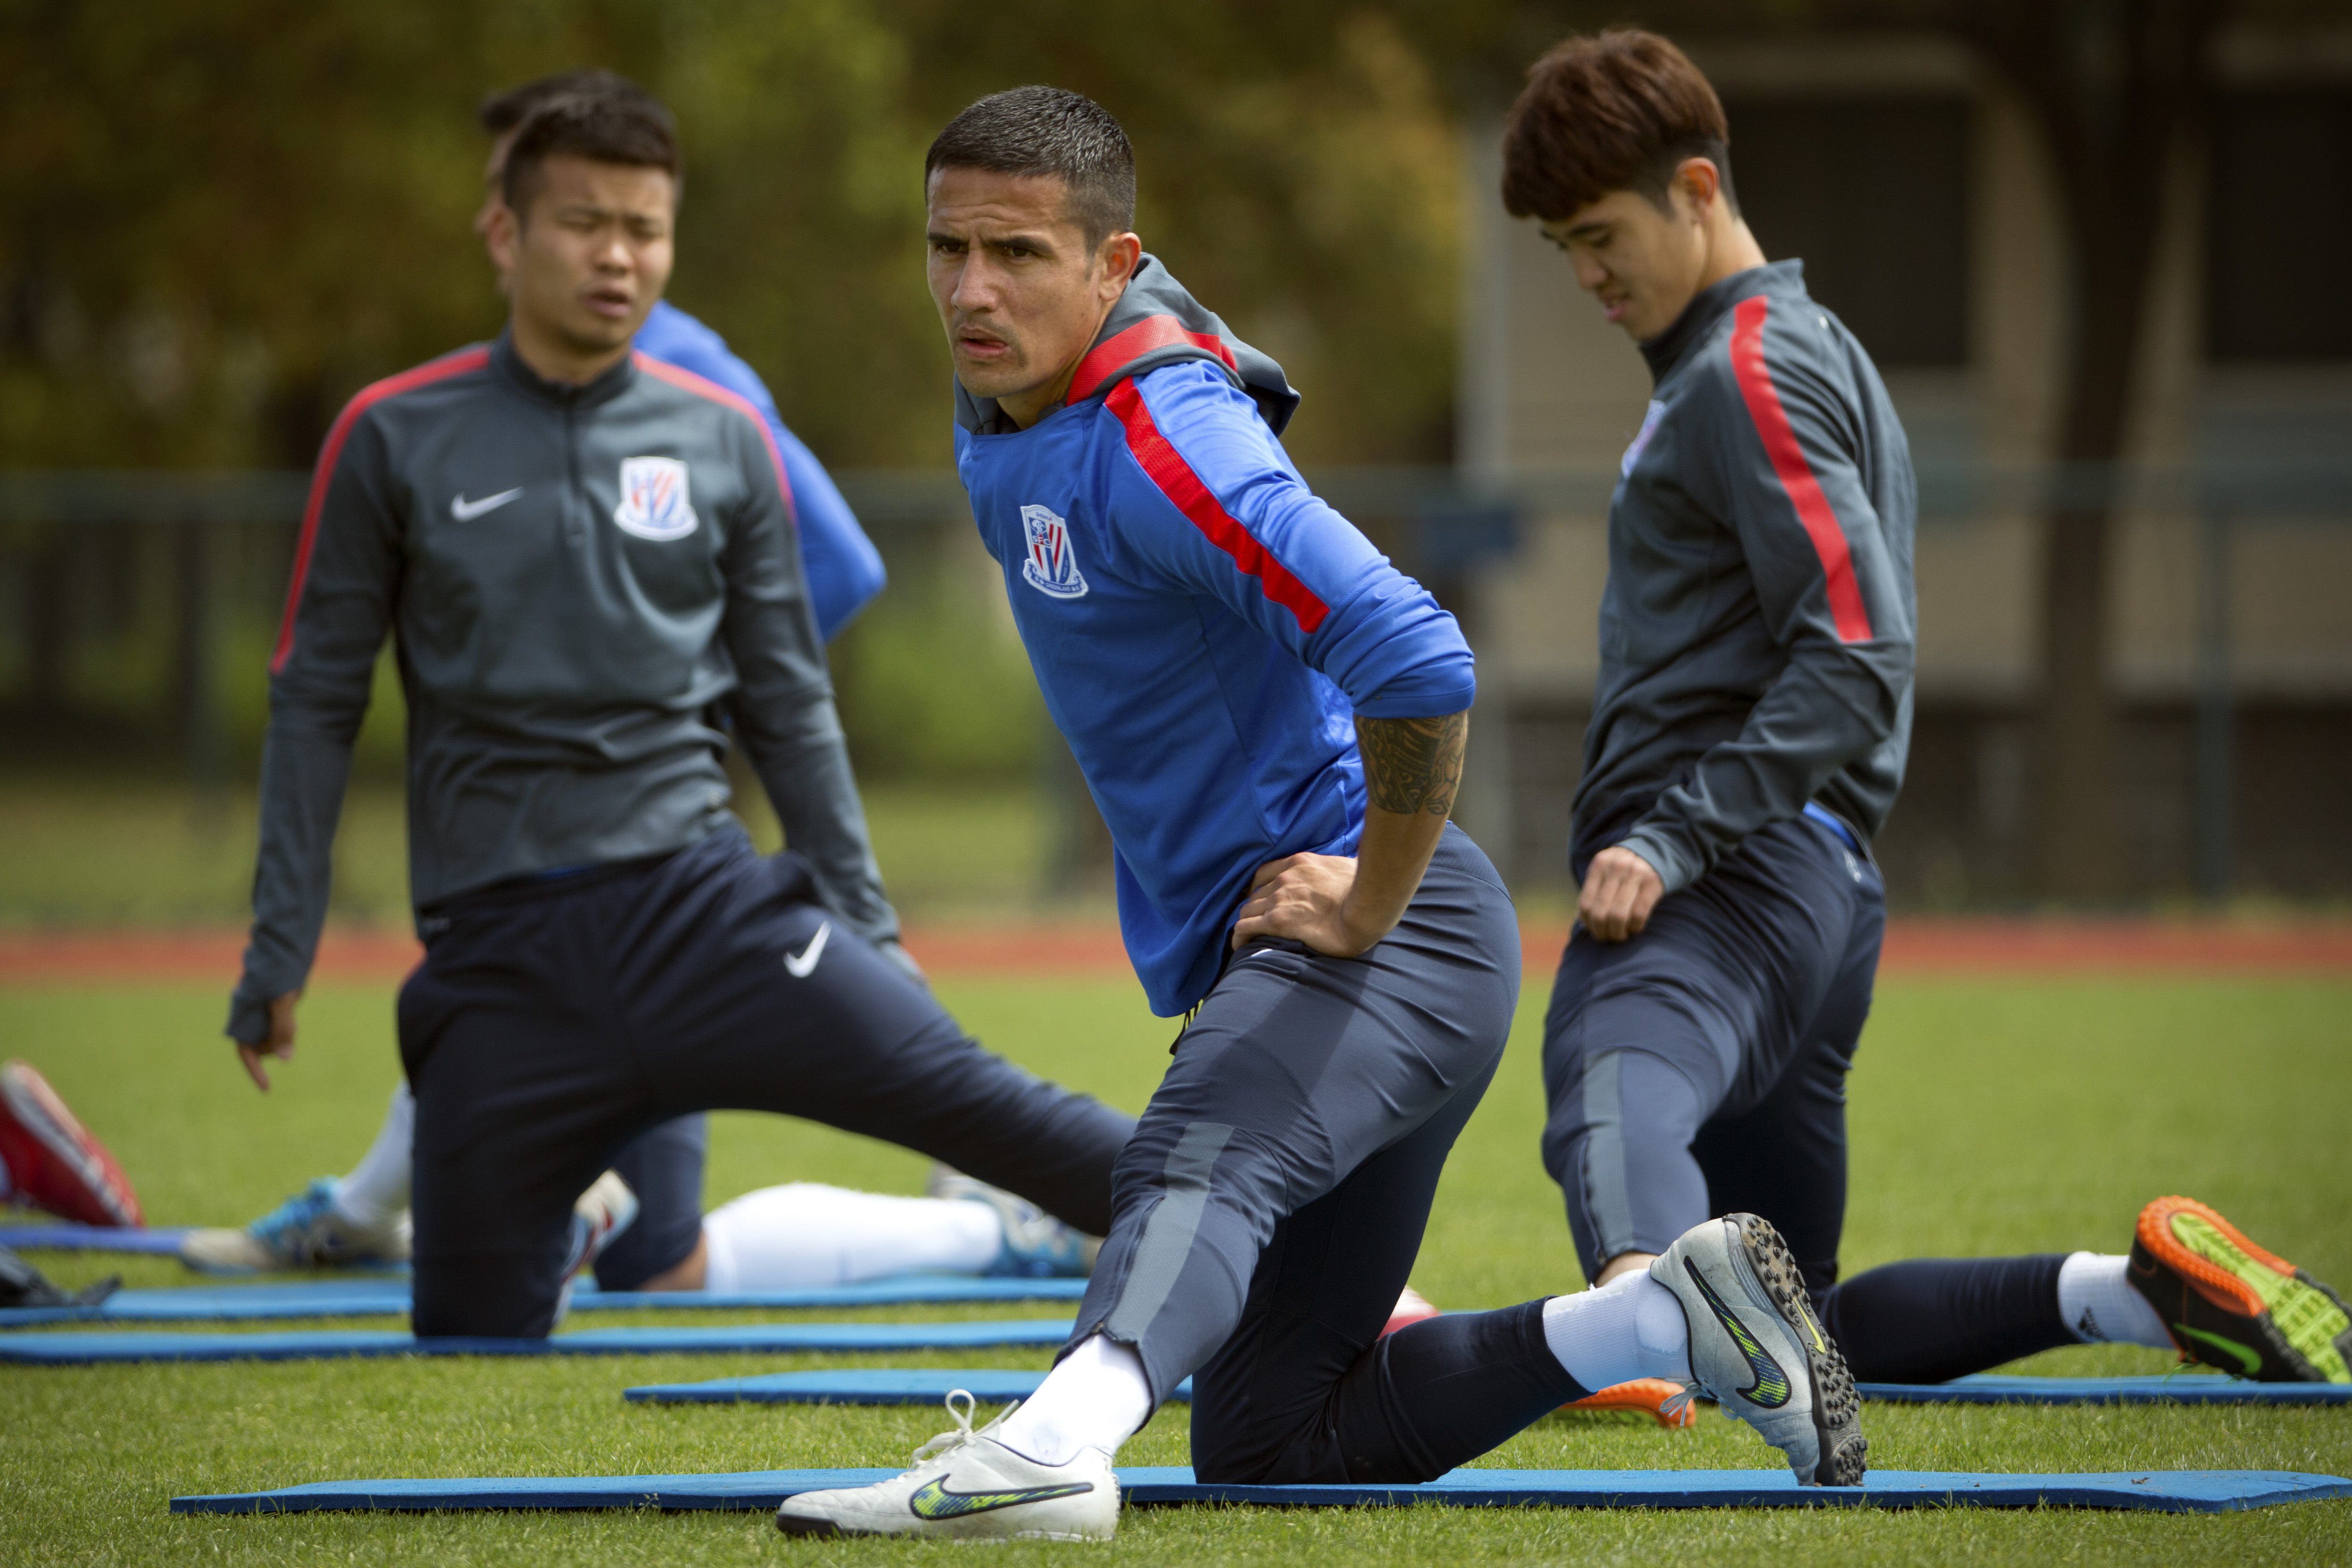 Australia star Tim Cahill joined Shanghai Shenhua last month, adding credibility to the side. Photos: AP